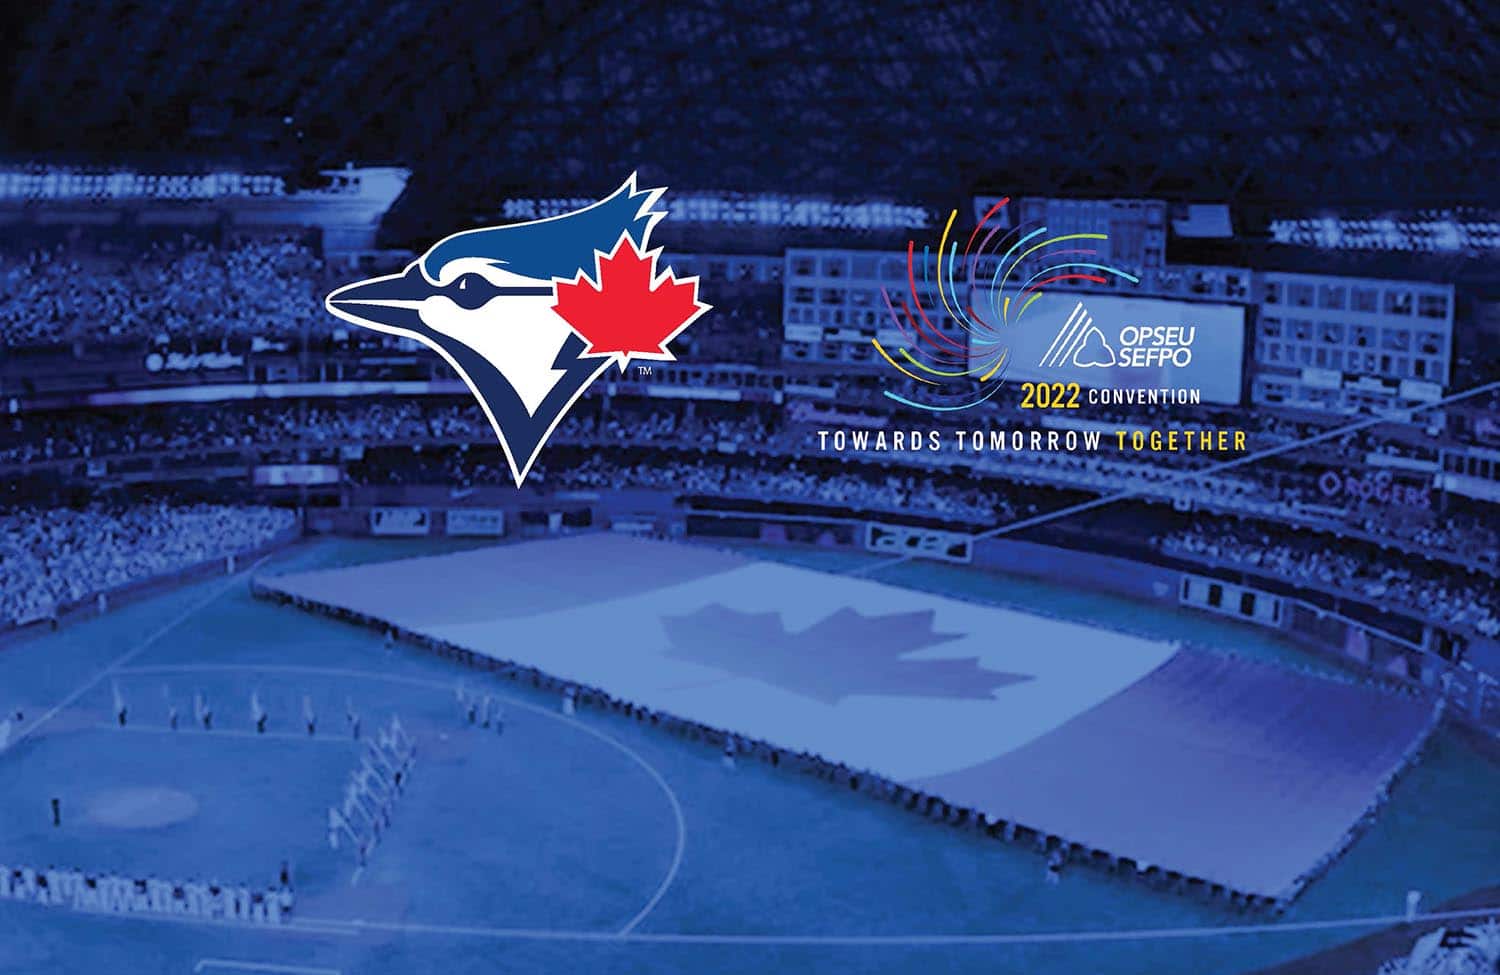 Blue Jays stadium with the Blue Jays logo and OPSEU/SEFPO Convention 2022